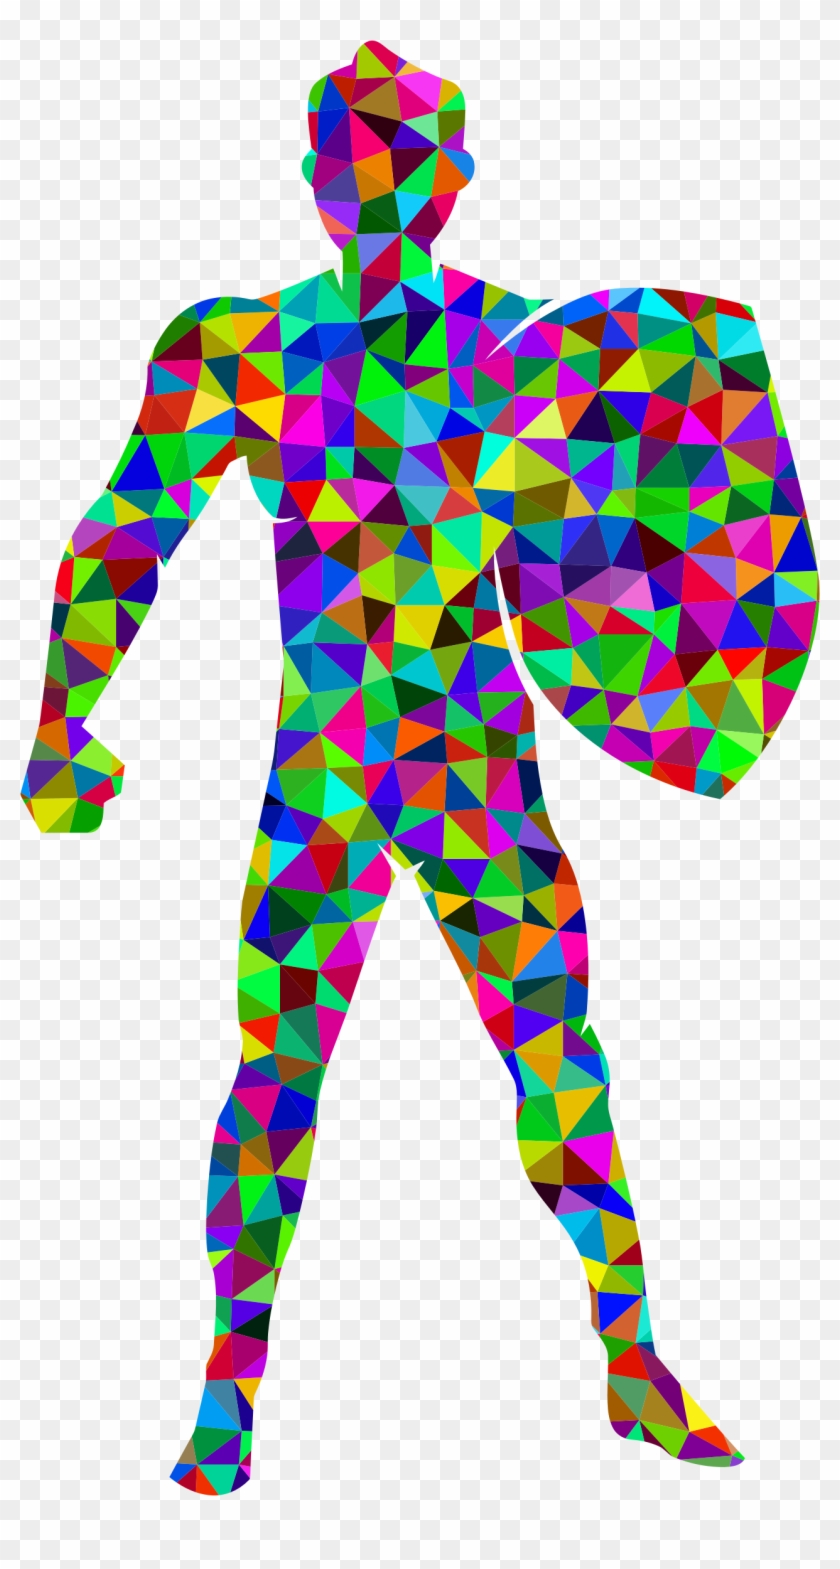 This Free Icons Png Design Of Prismatic Low Poly Man - Body Silhouette Human Body Icon Png Clipart #2442310